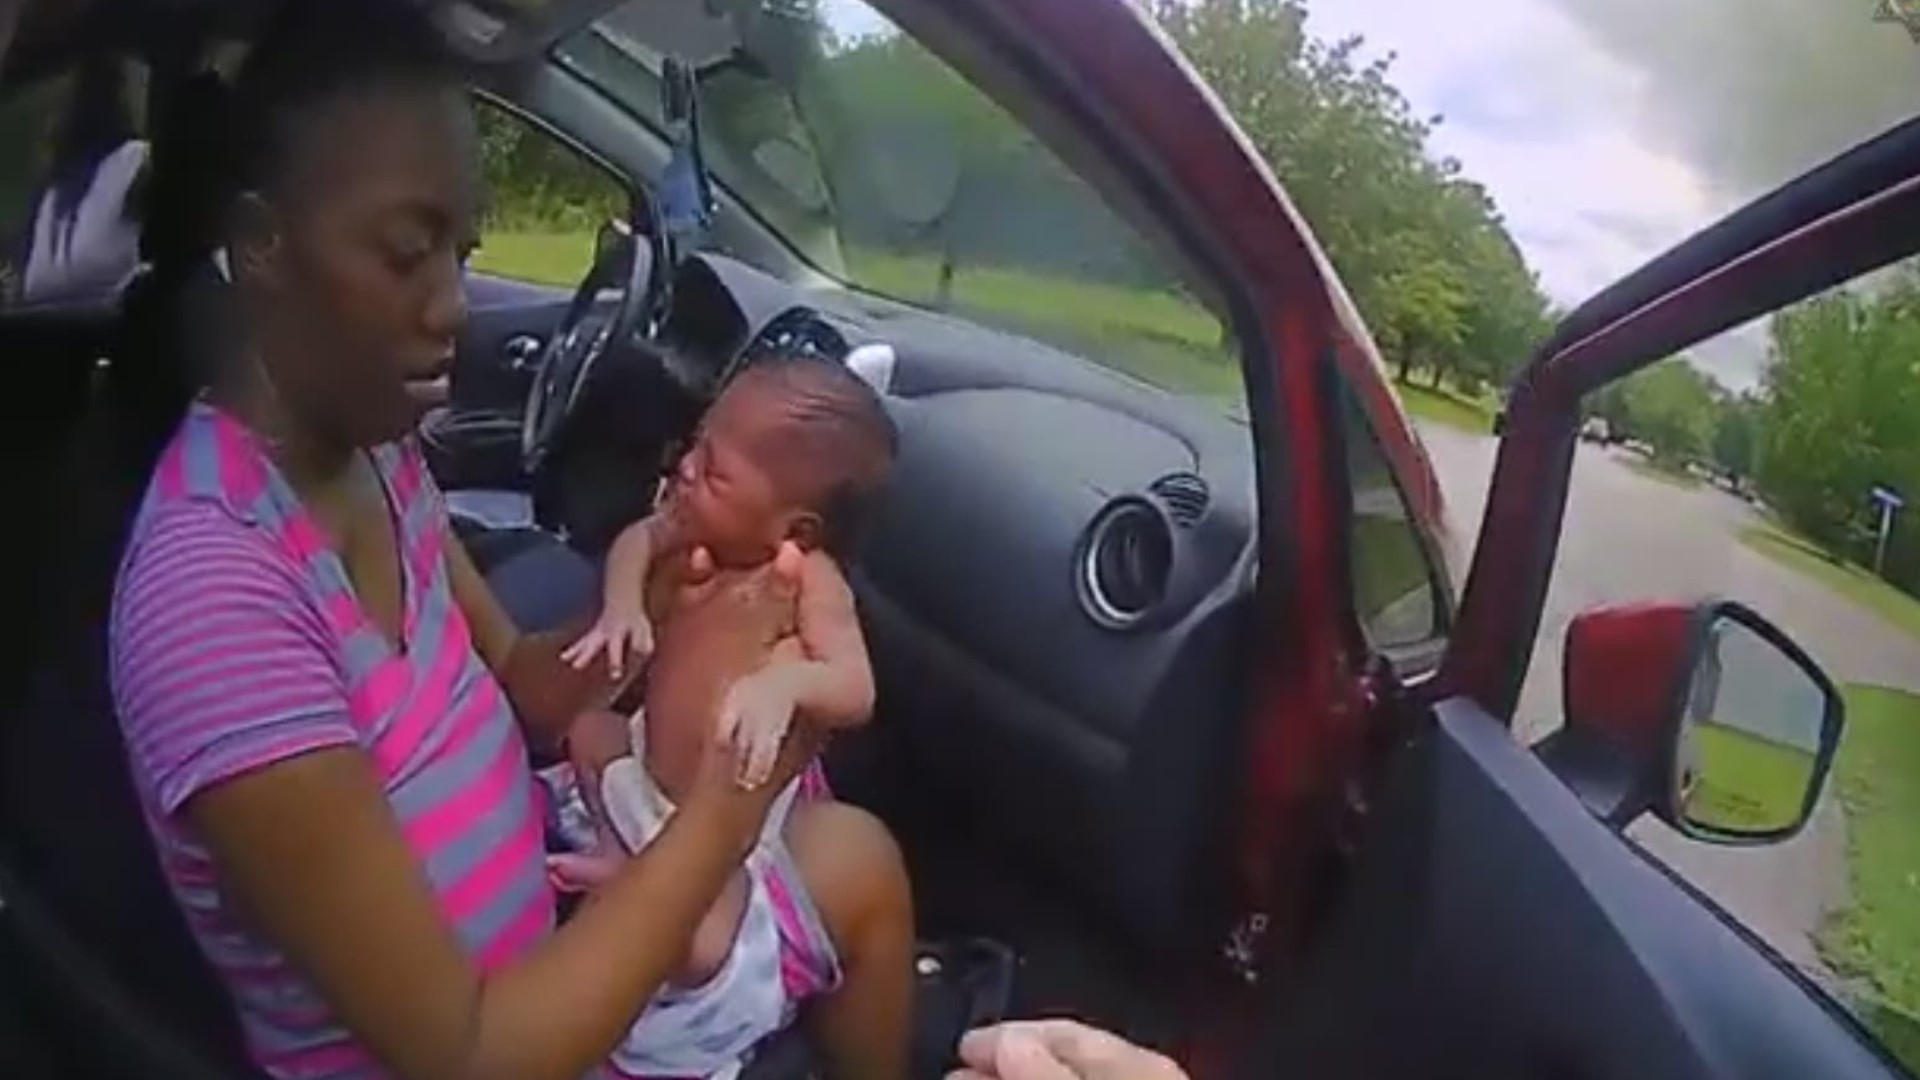 A deputy in South Carolina is being hailed a hero after video shows him saving the life of a choking 12-day-old baby.